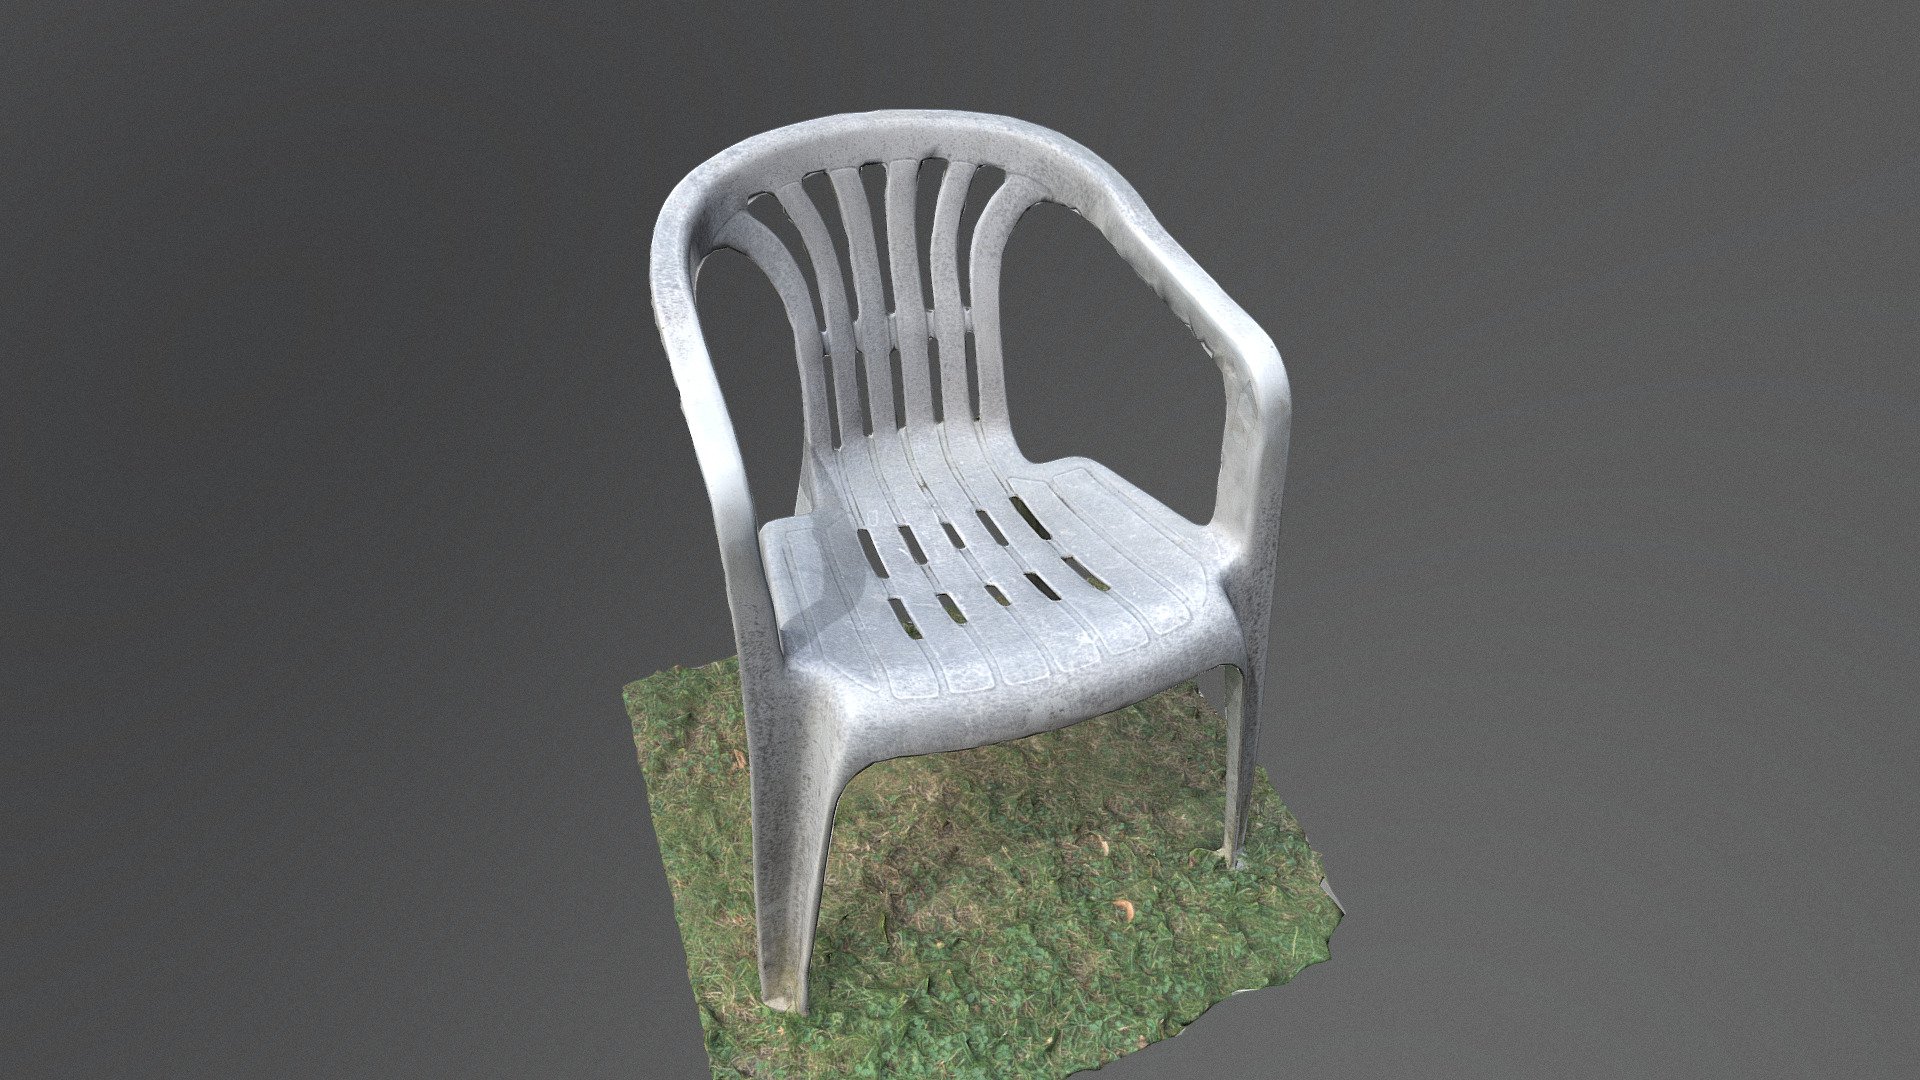 Weathered old white plastic garden chair seat furniture on grass

Photogrammetry scan 120x24MP, 16K texture - Weathered plastic garden chair - Buy Royalty Free 3D model by matousekfoto 3d model